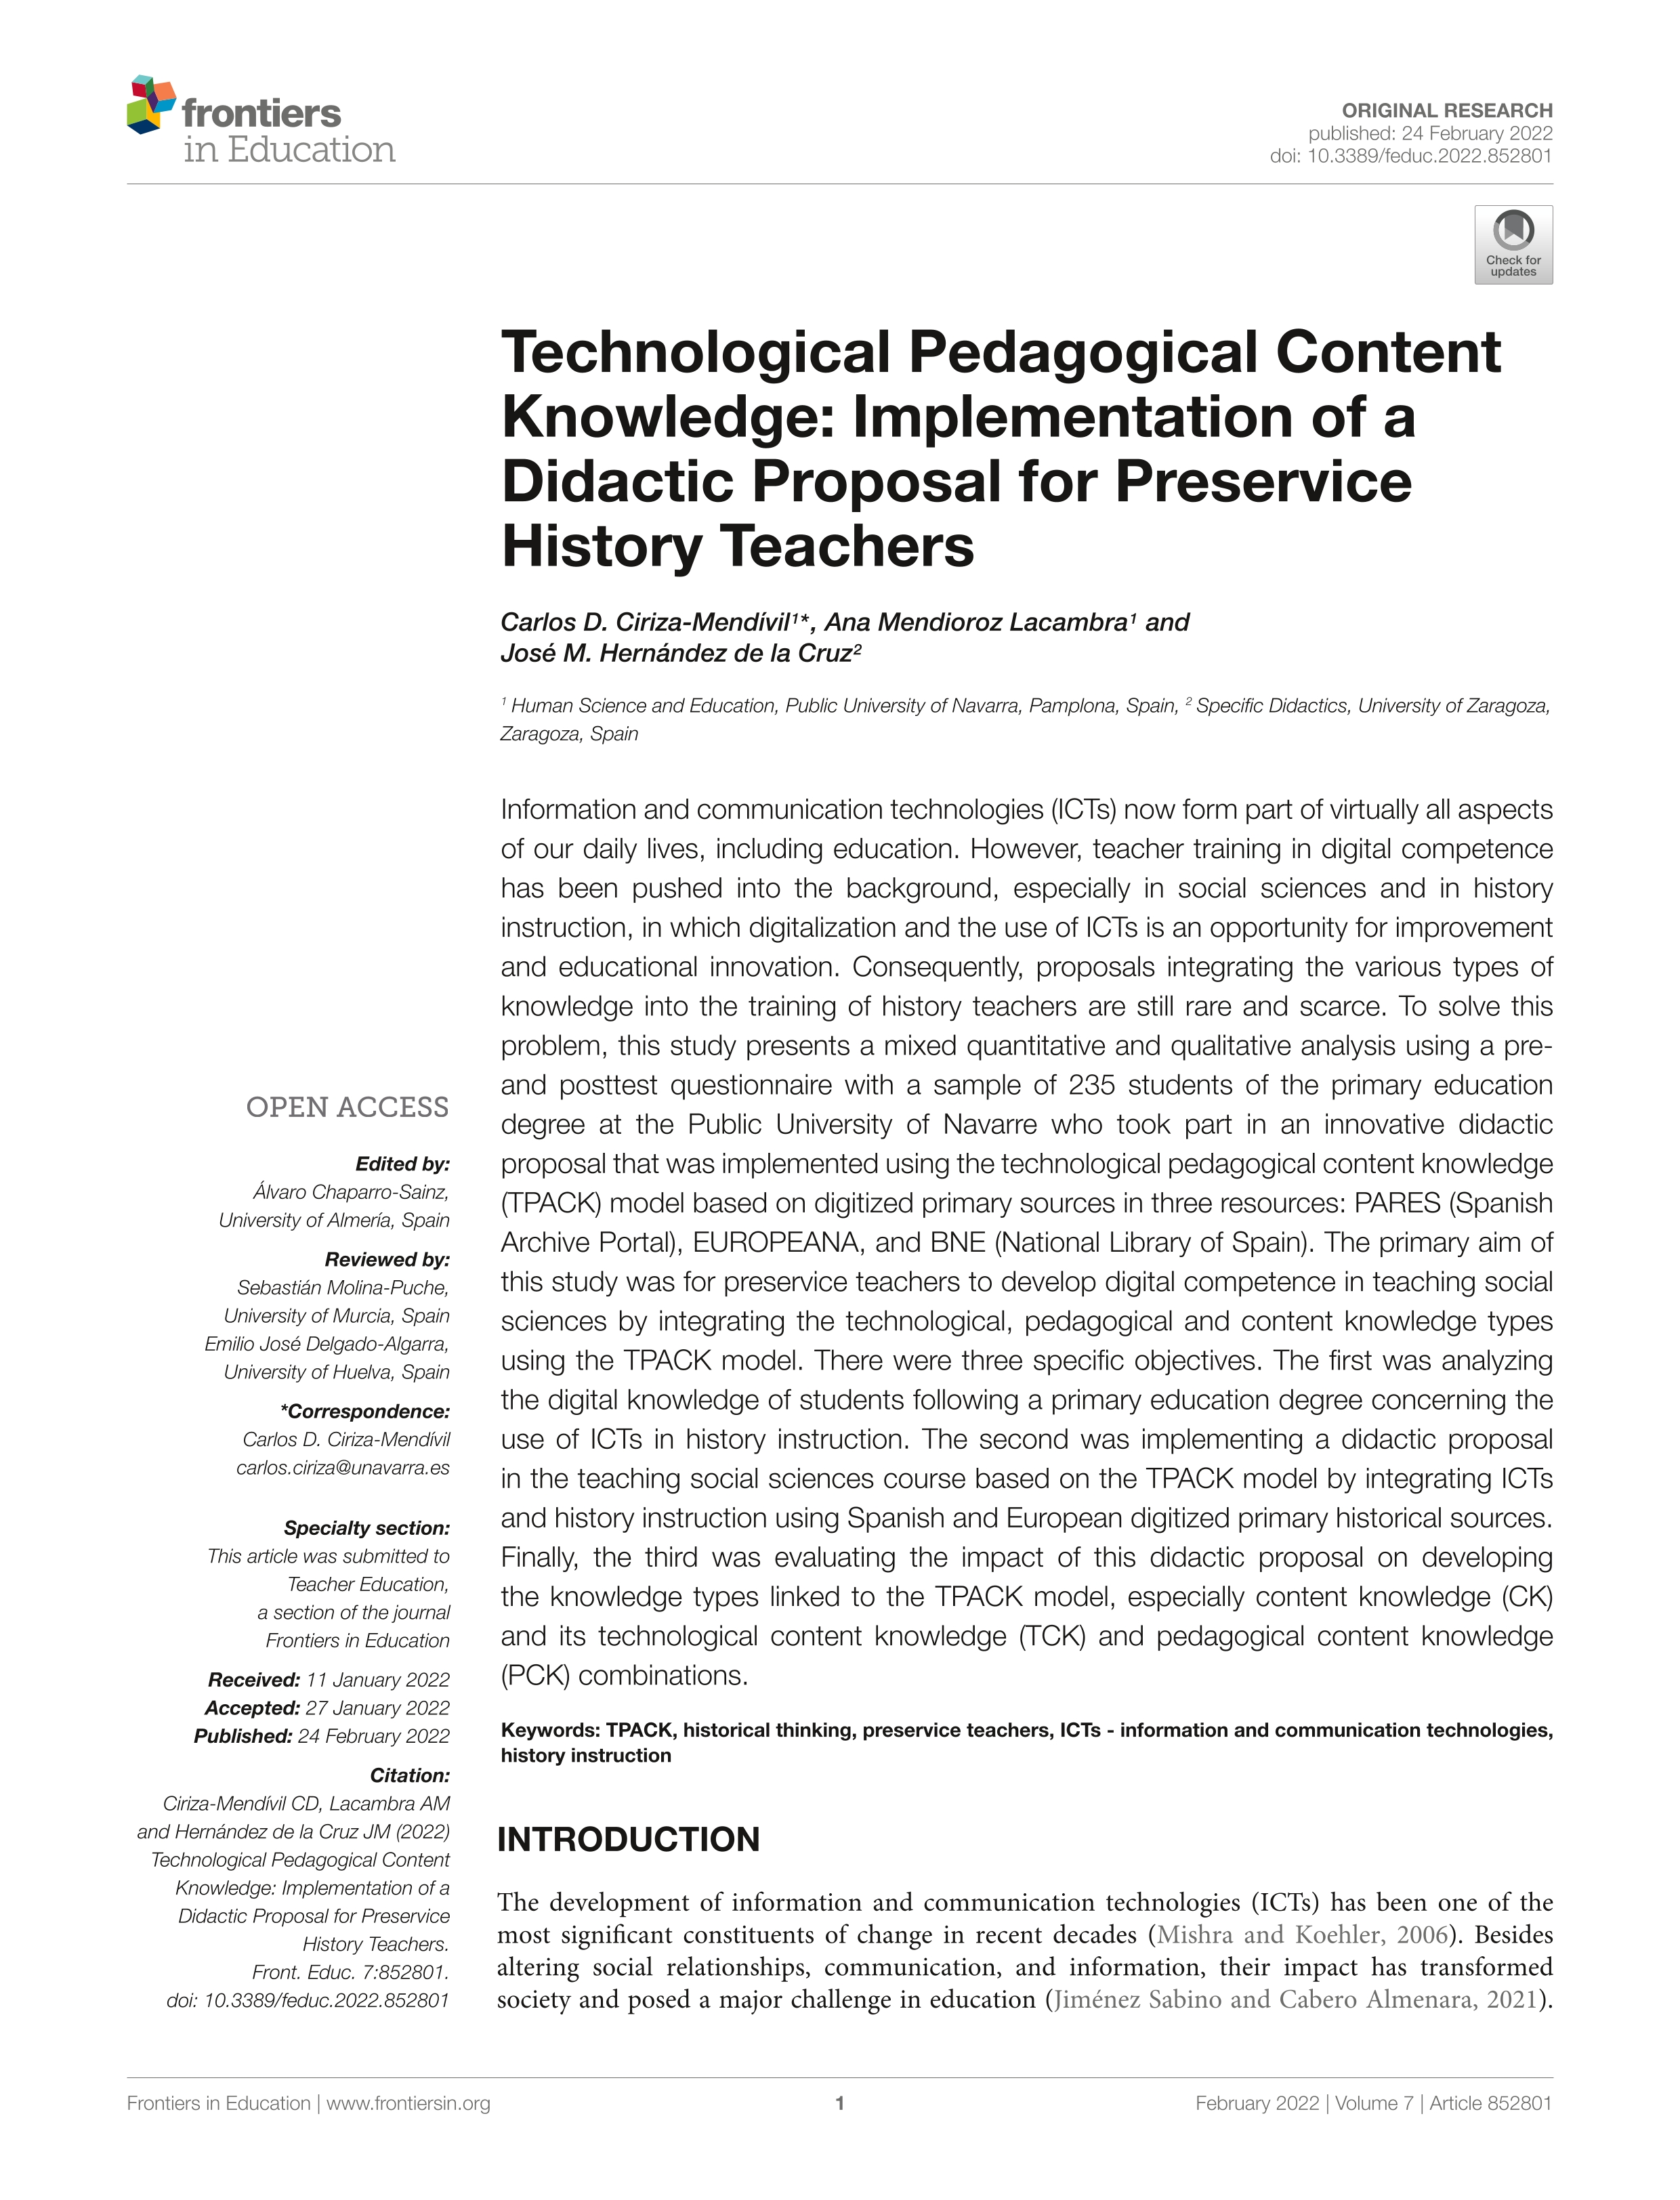 Technological Pedagogical Content Knowledge: Implementation of a Didactic Proposal for Preservice History Teachers